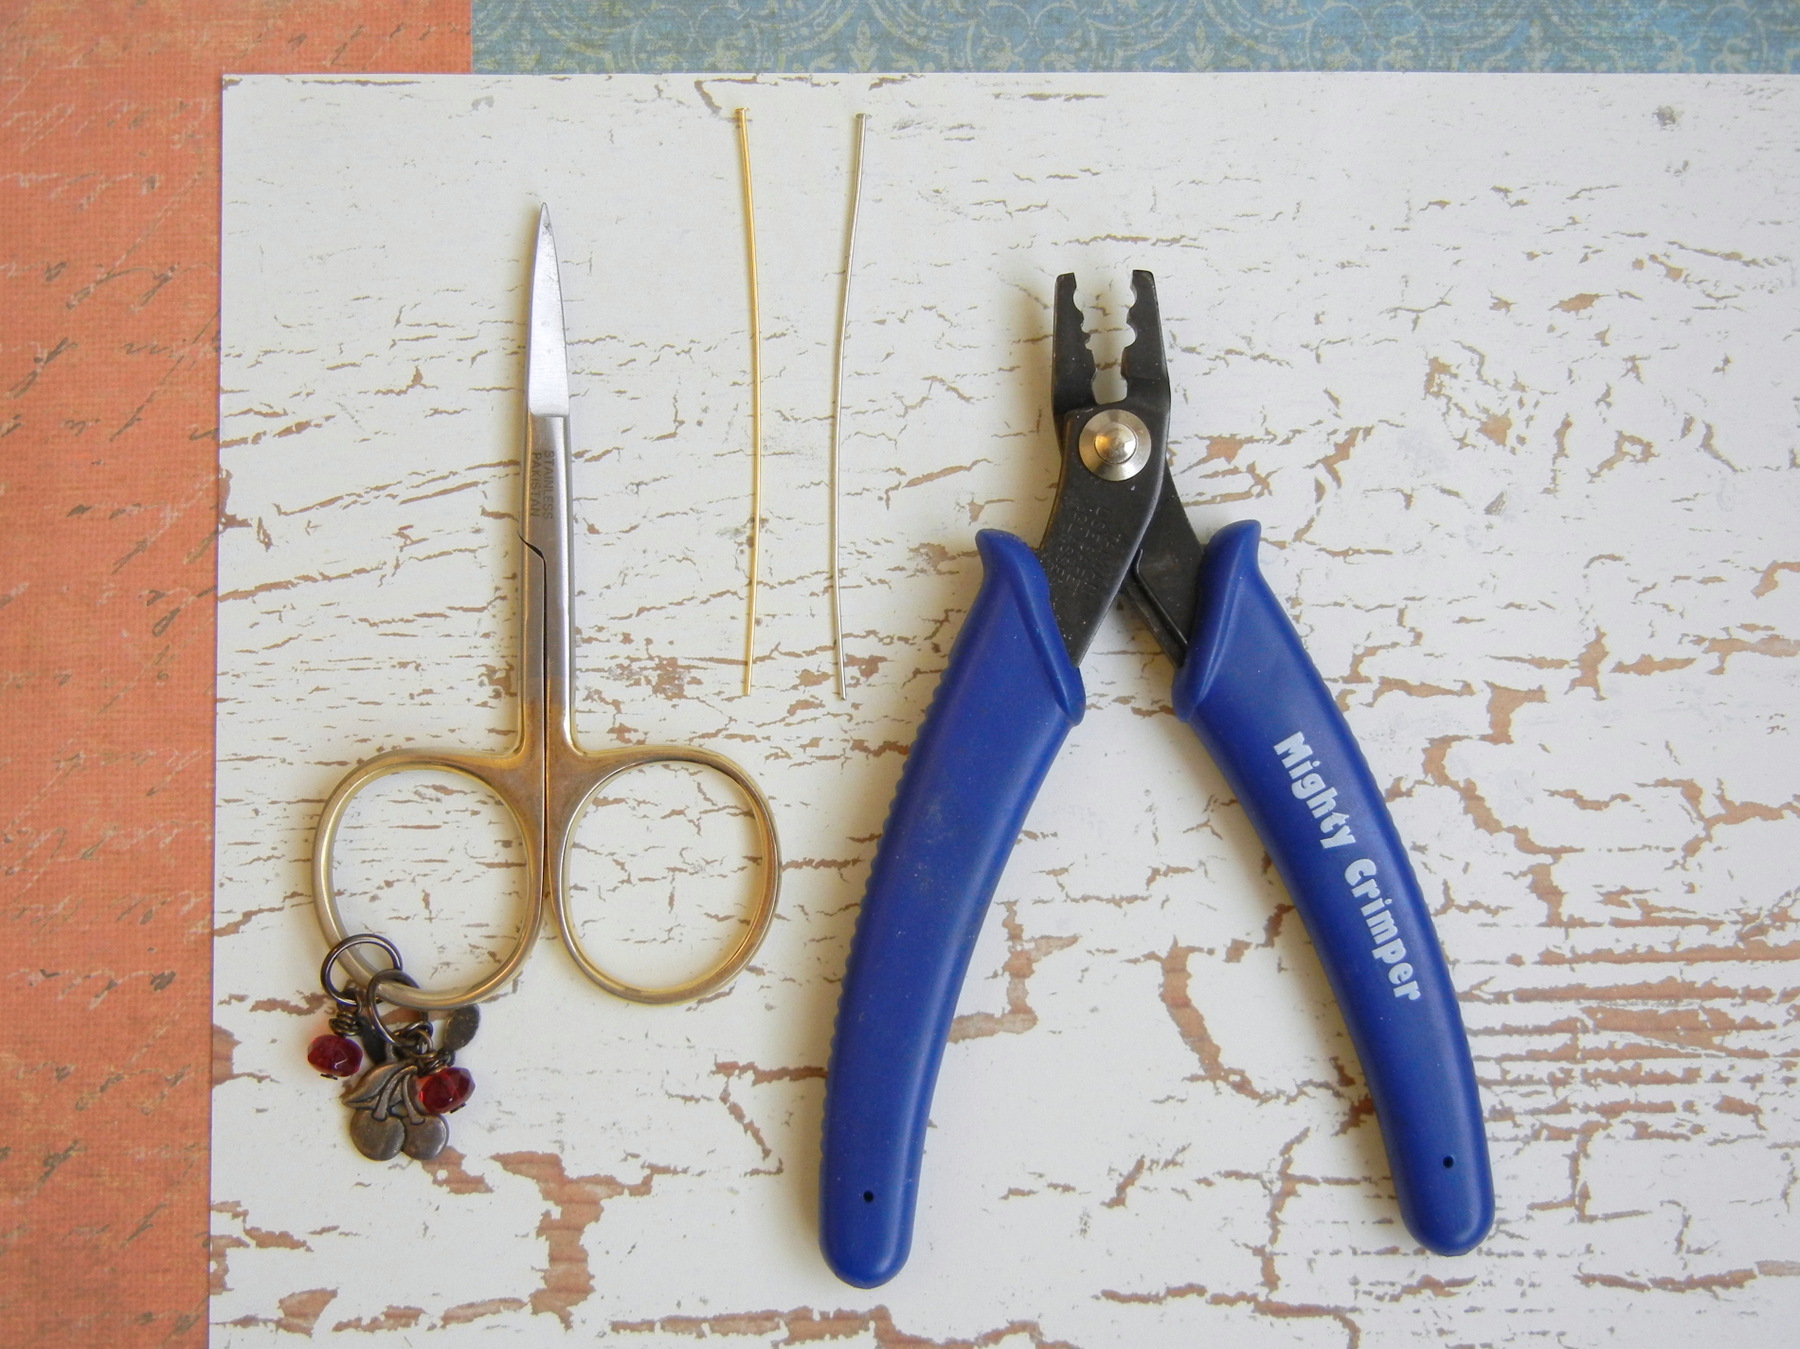 65-012 EURO TOOL Jewelry Pliers, Mighty Crimper, 5 - Rings & Things